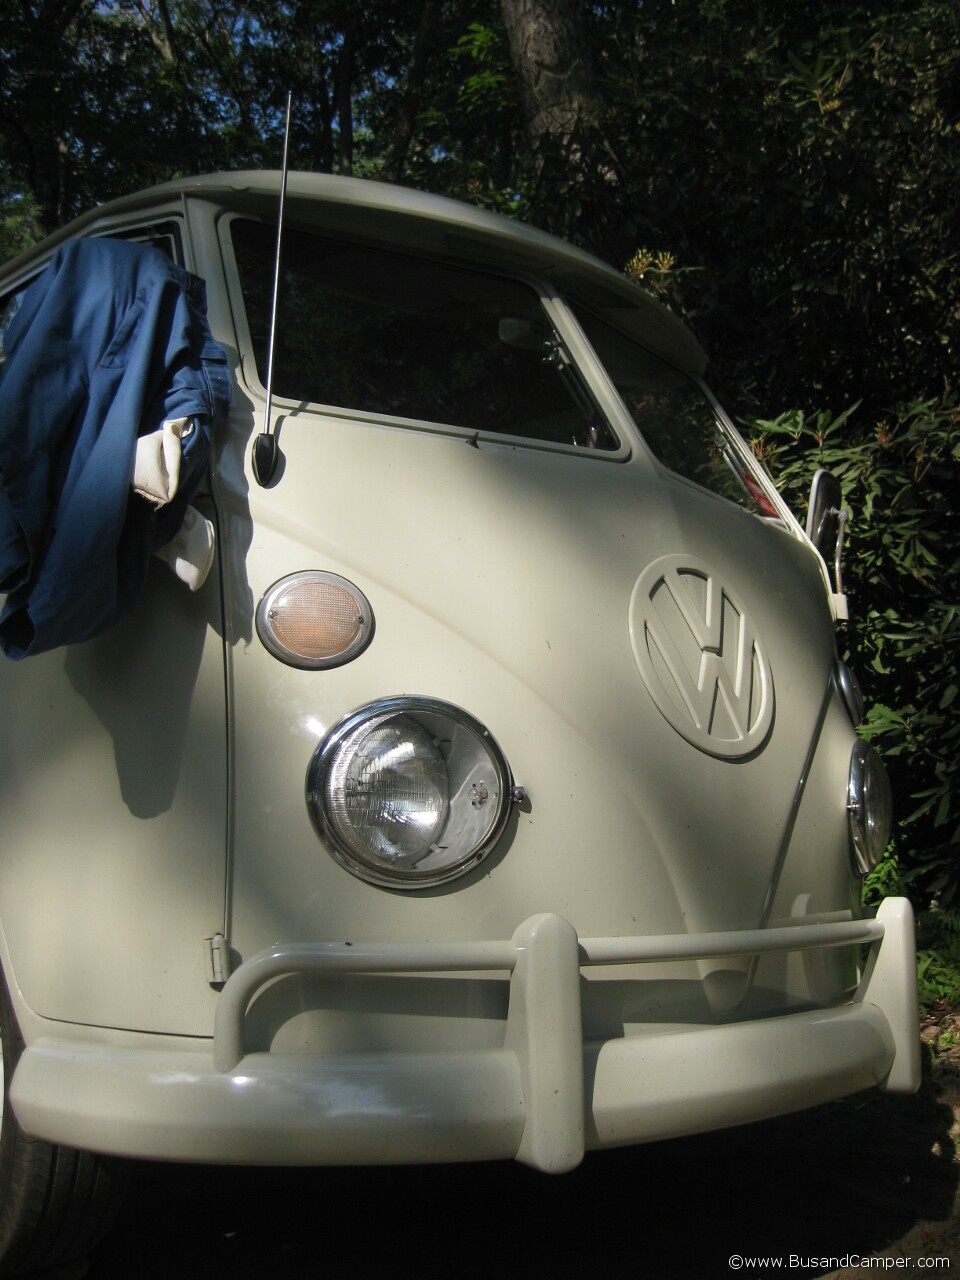 Artistic picture of a Campervan